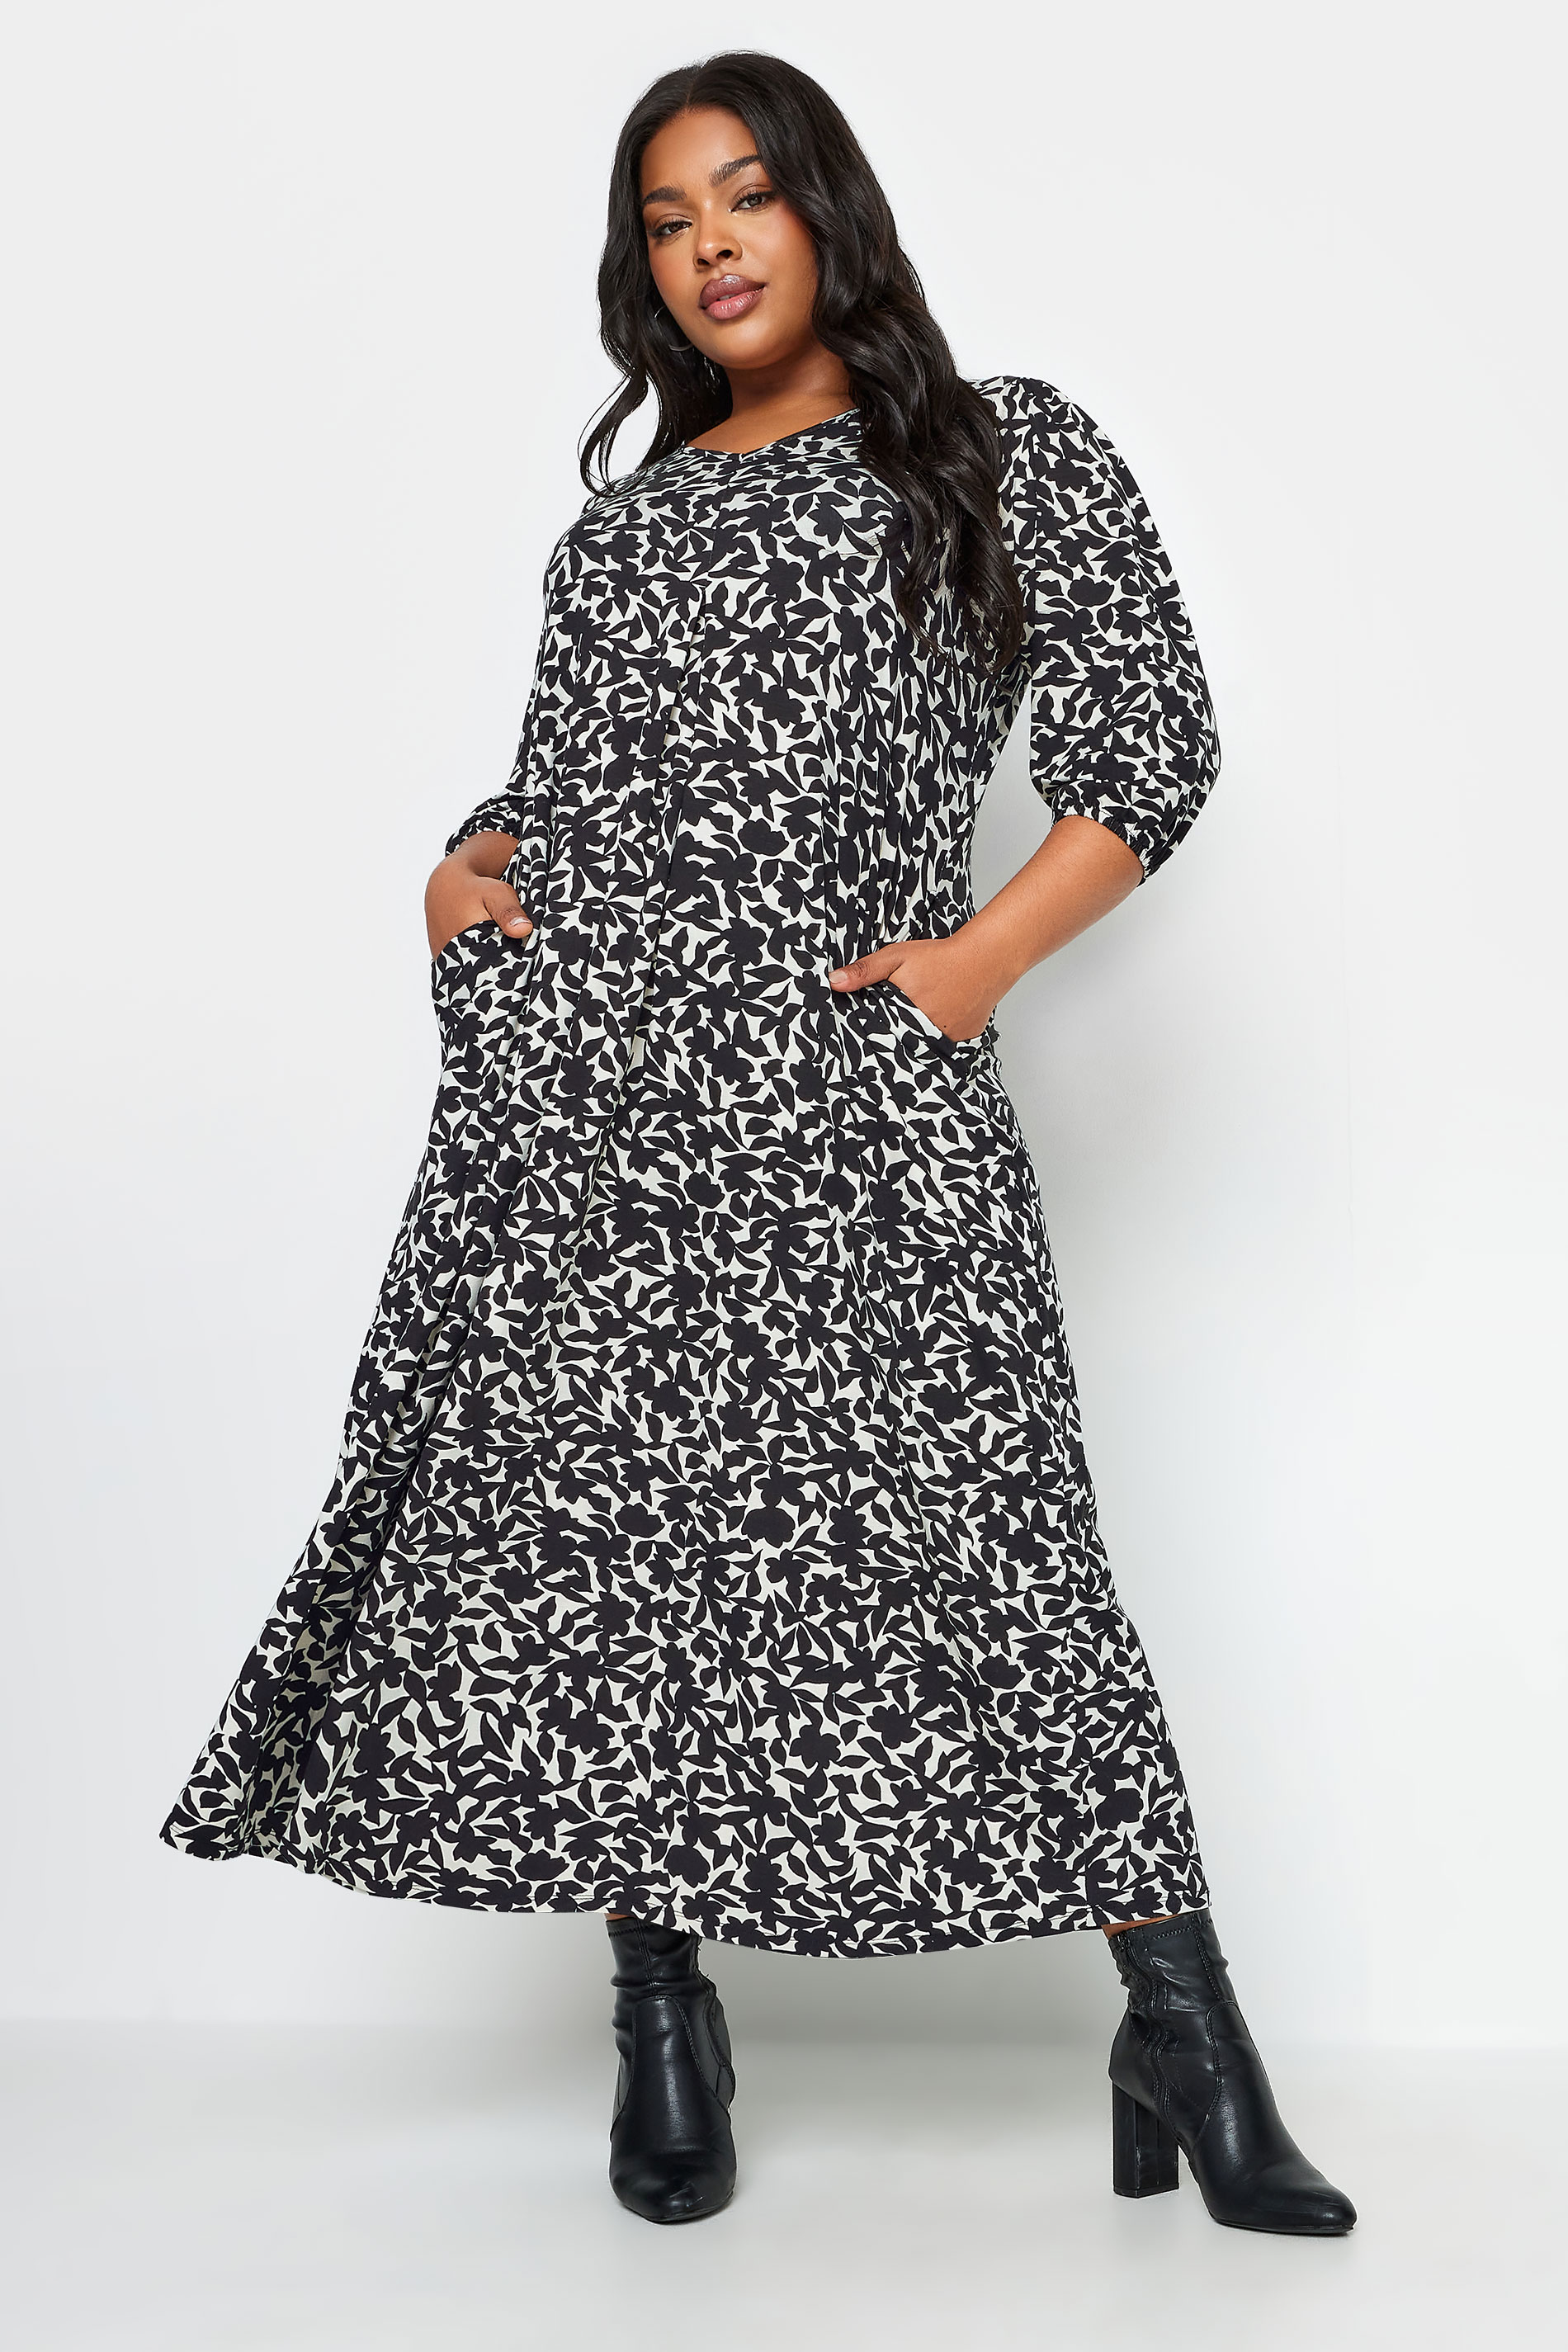 YOURS Plus Size Black & White Floral Print Swing Maxi Dress | Yours ...